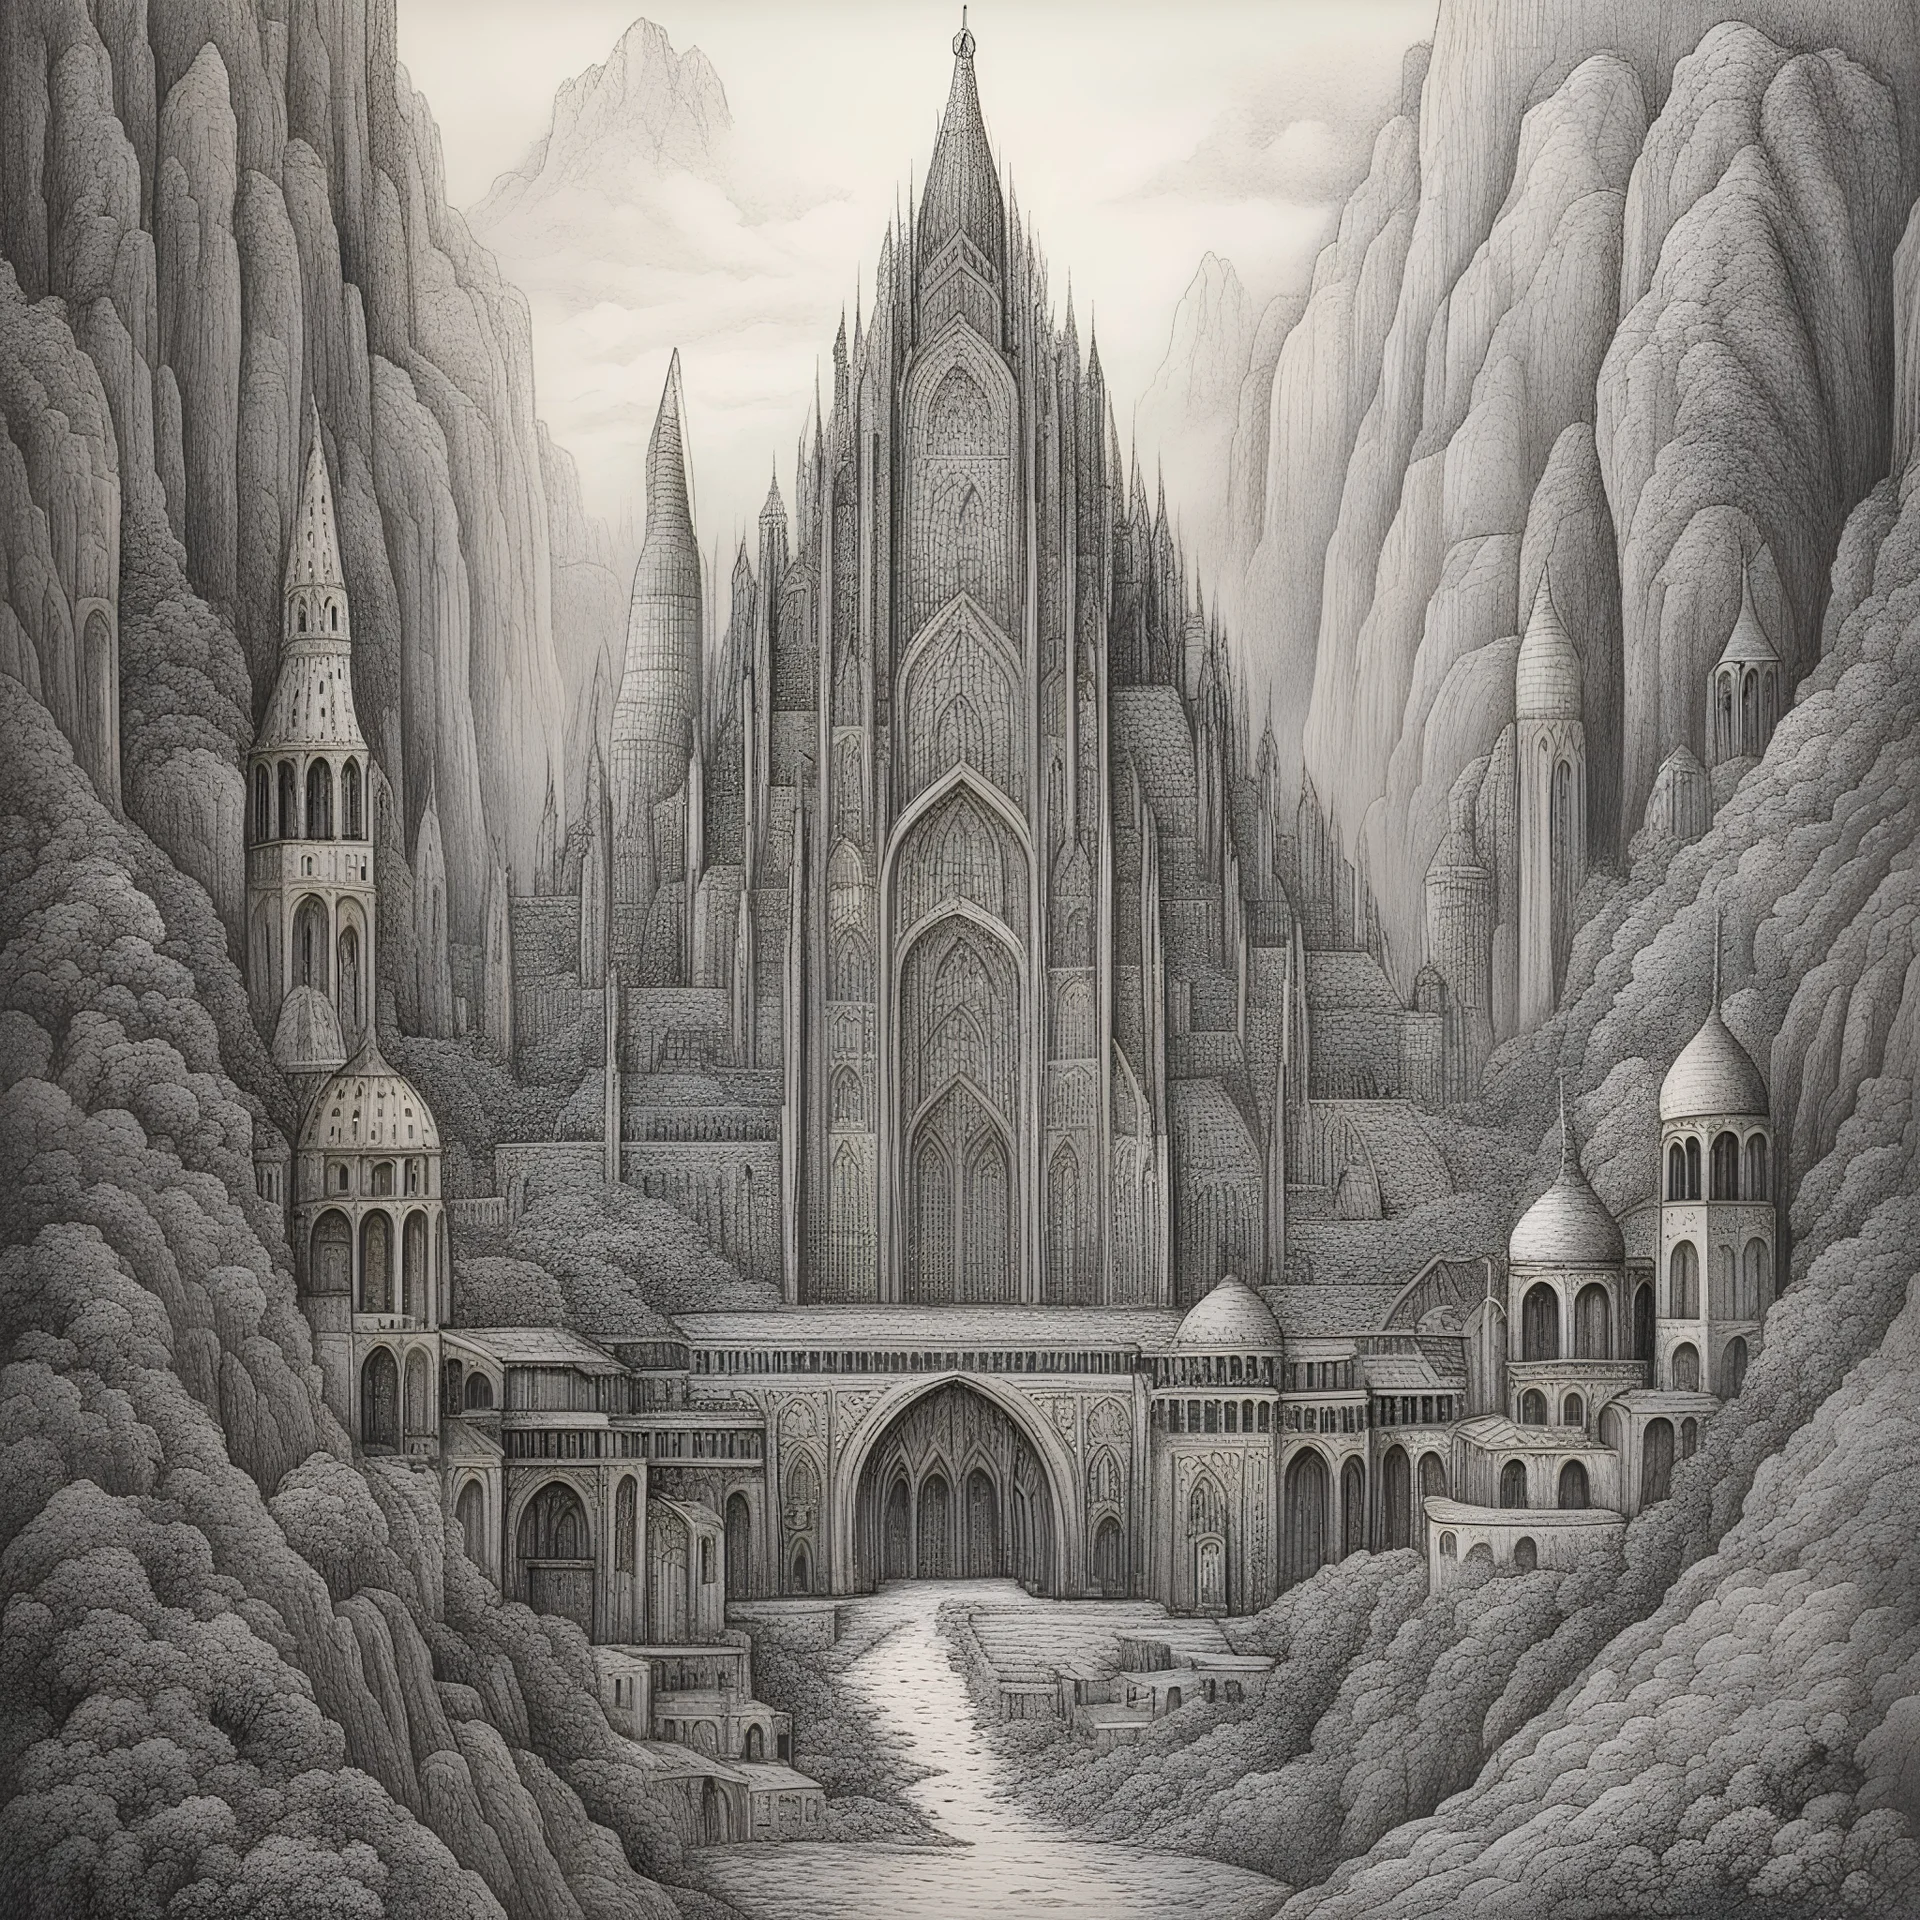 drawing by artist Otto Rapp: souvenirs of Minas Tirith